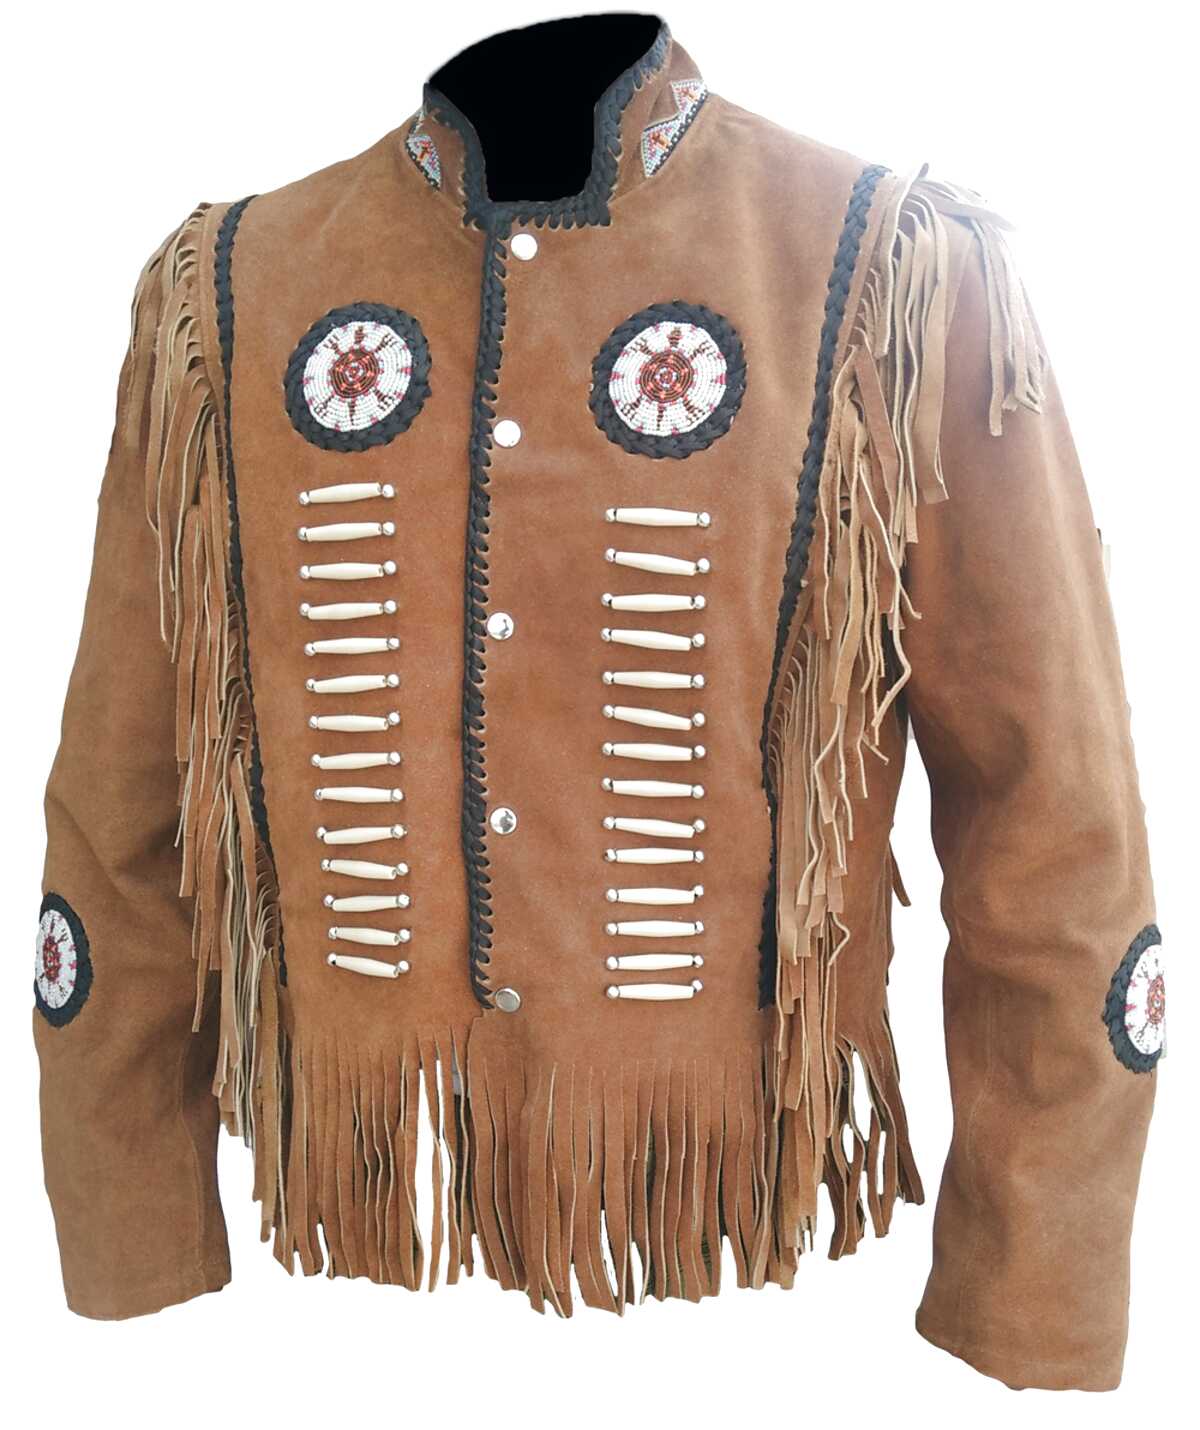 Native American Jacket Mens for sale in UK | 37 used Native American ...